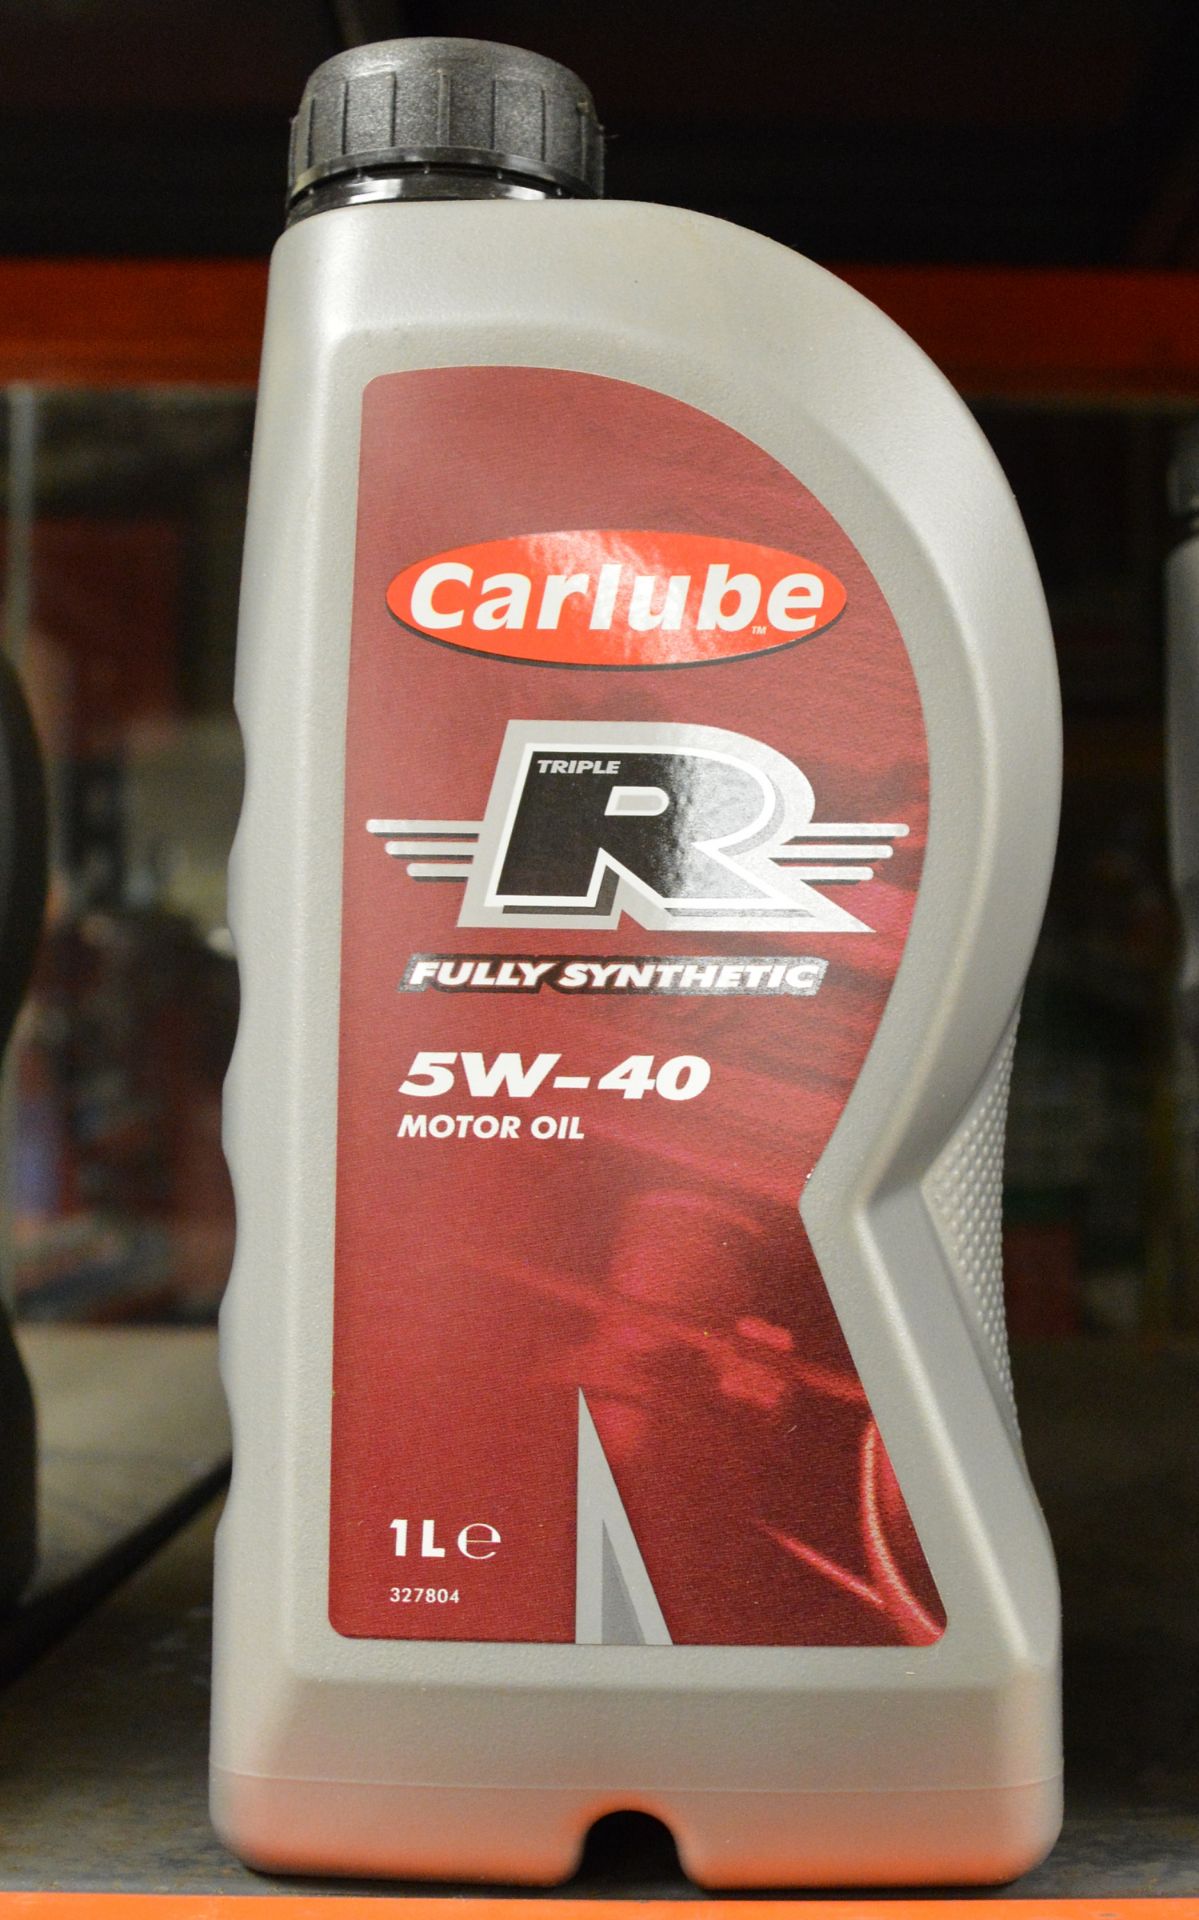 3x 1L Carlube 5W-40 Fully Synthetic Motor Oil - Image 2 of 2